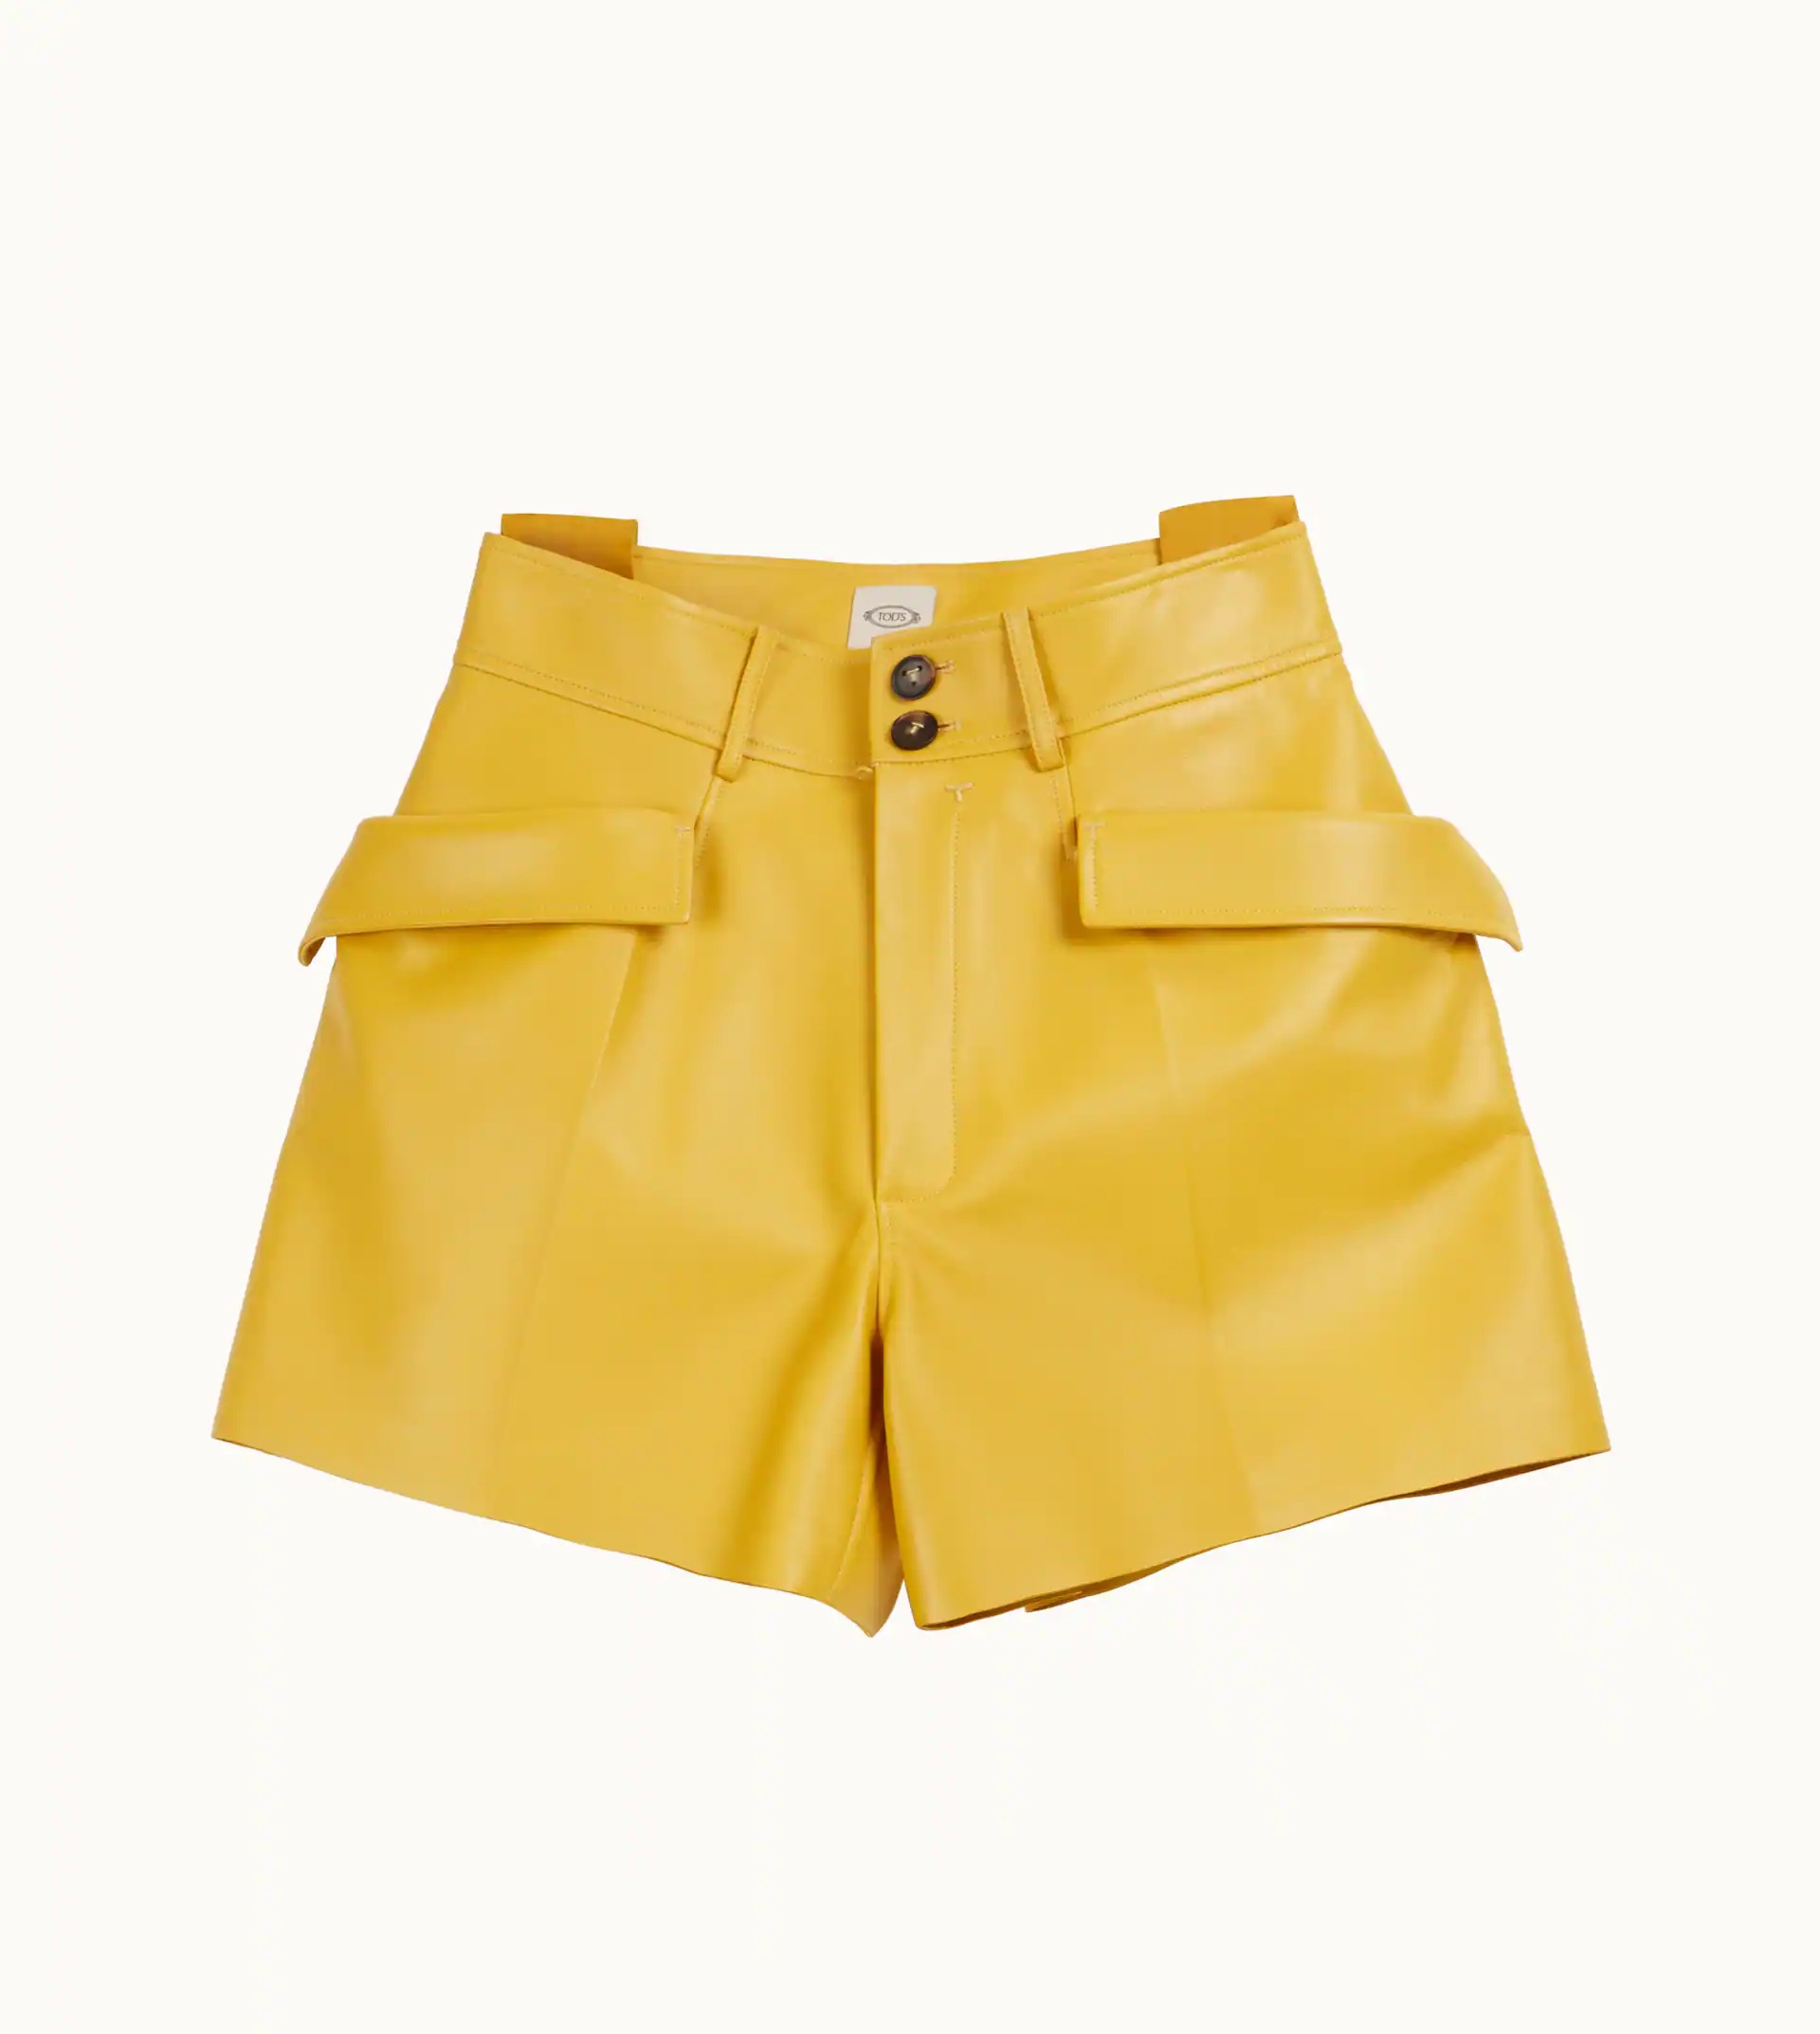 SHORTS IN LEATHER - YELLOW - 1